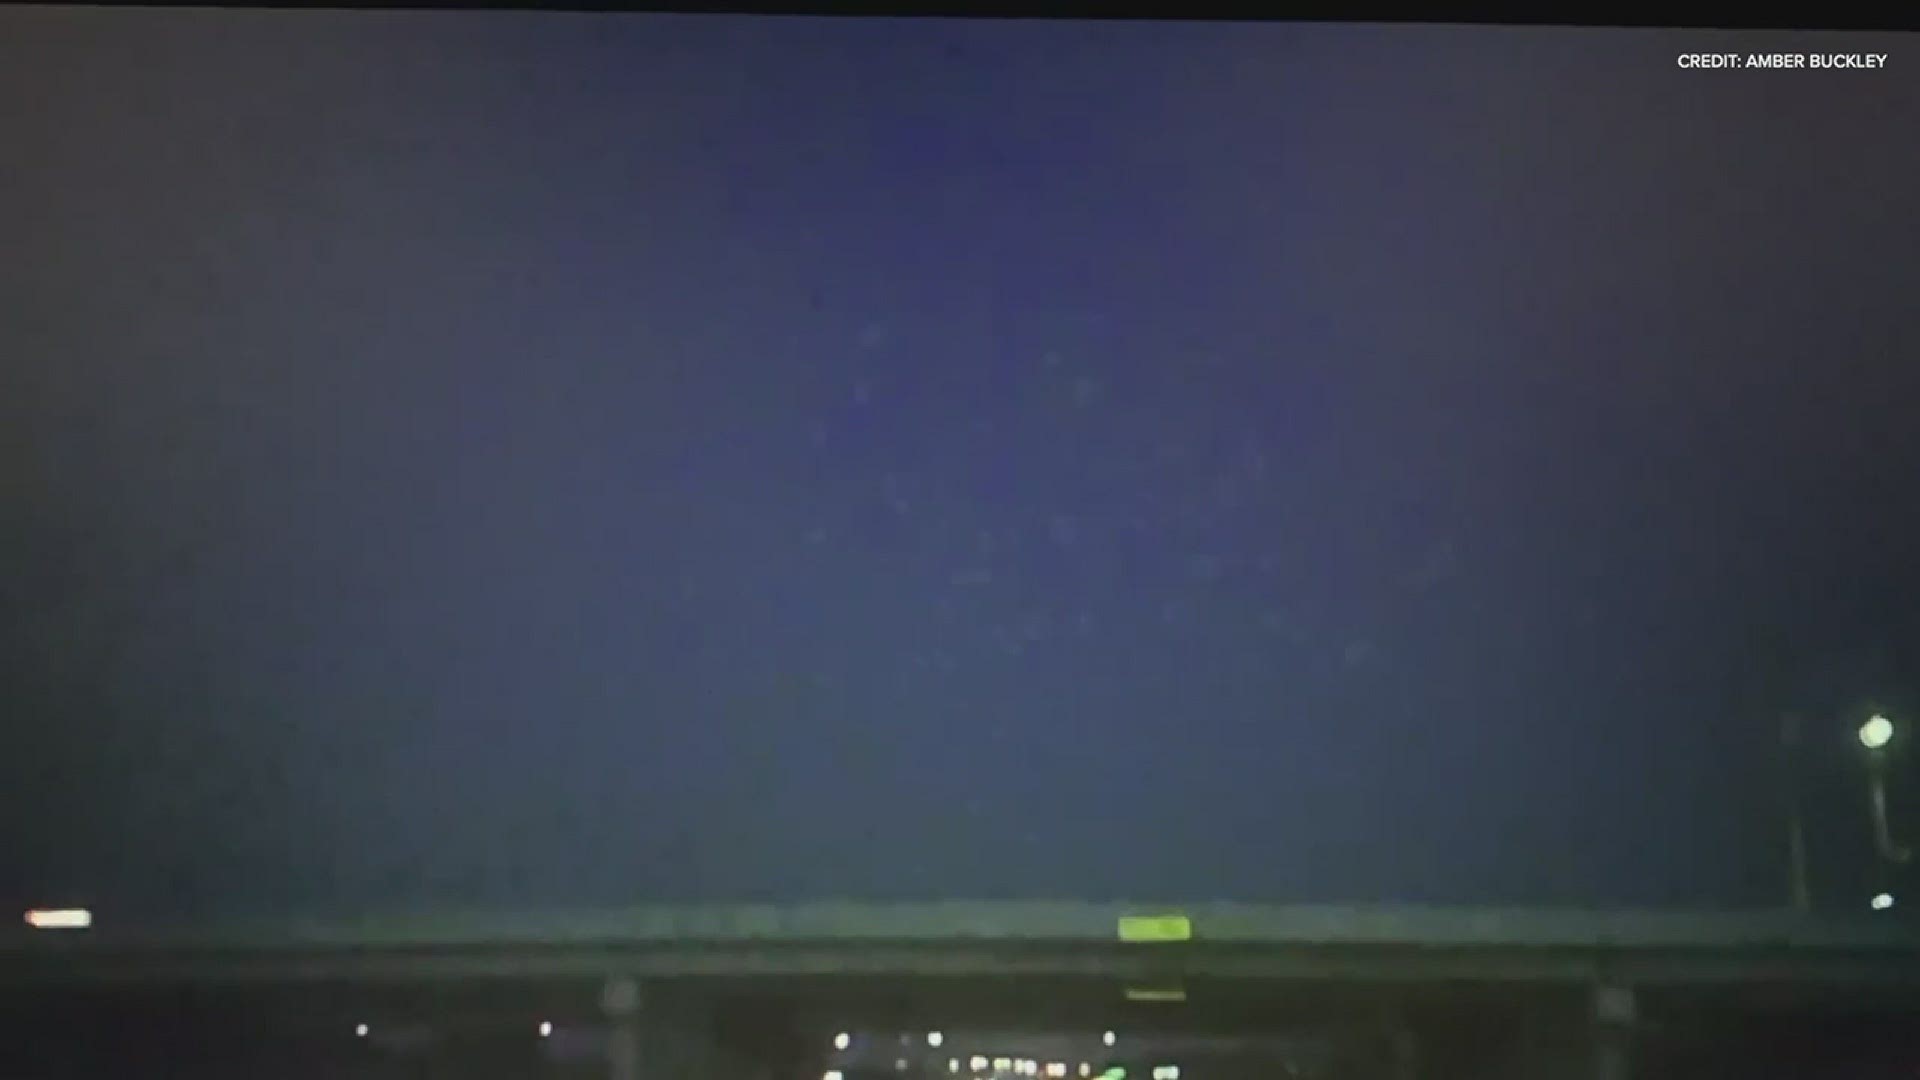 Viewers shared these two videos of the meteor with WFAA.